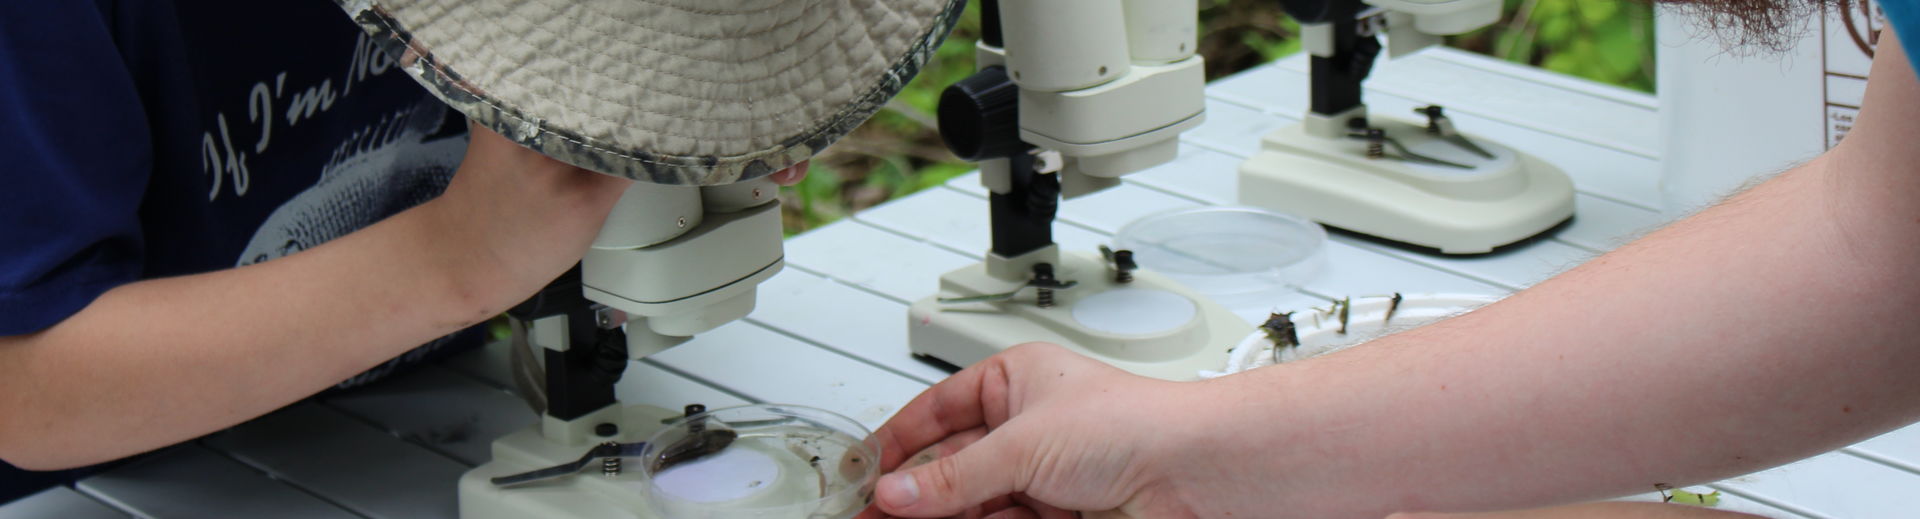 kids doing citizen science with microscopes